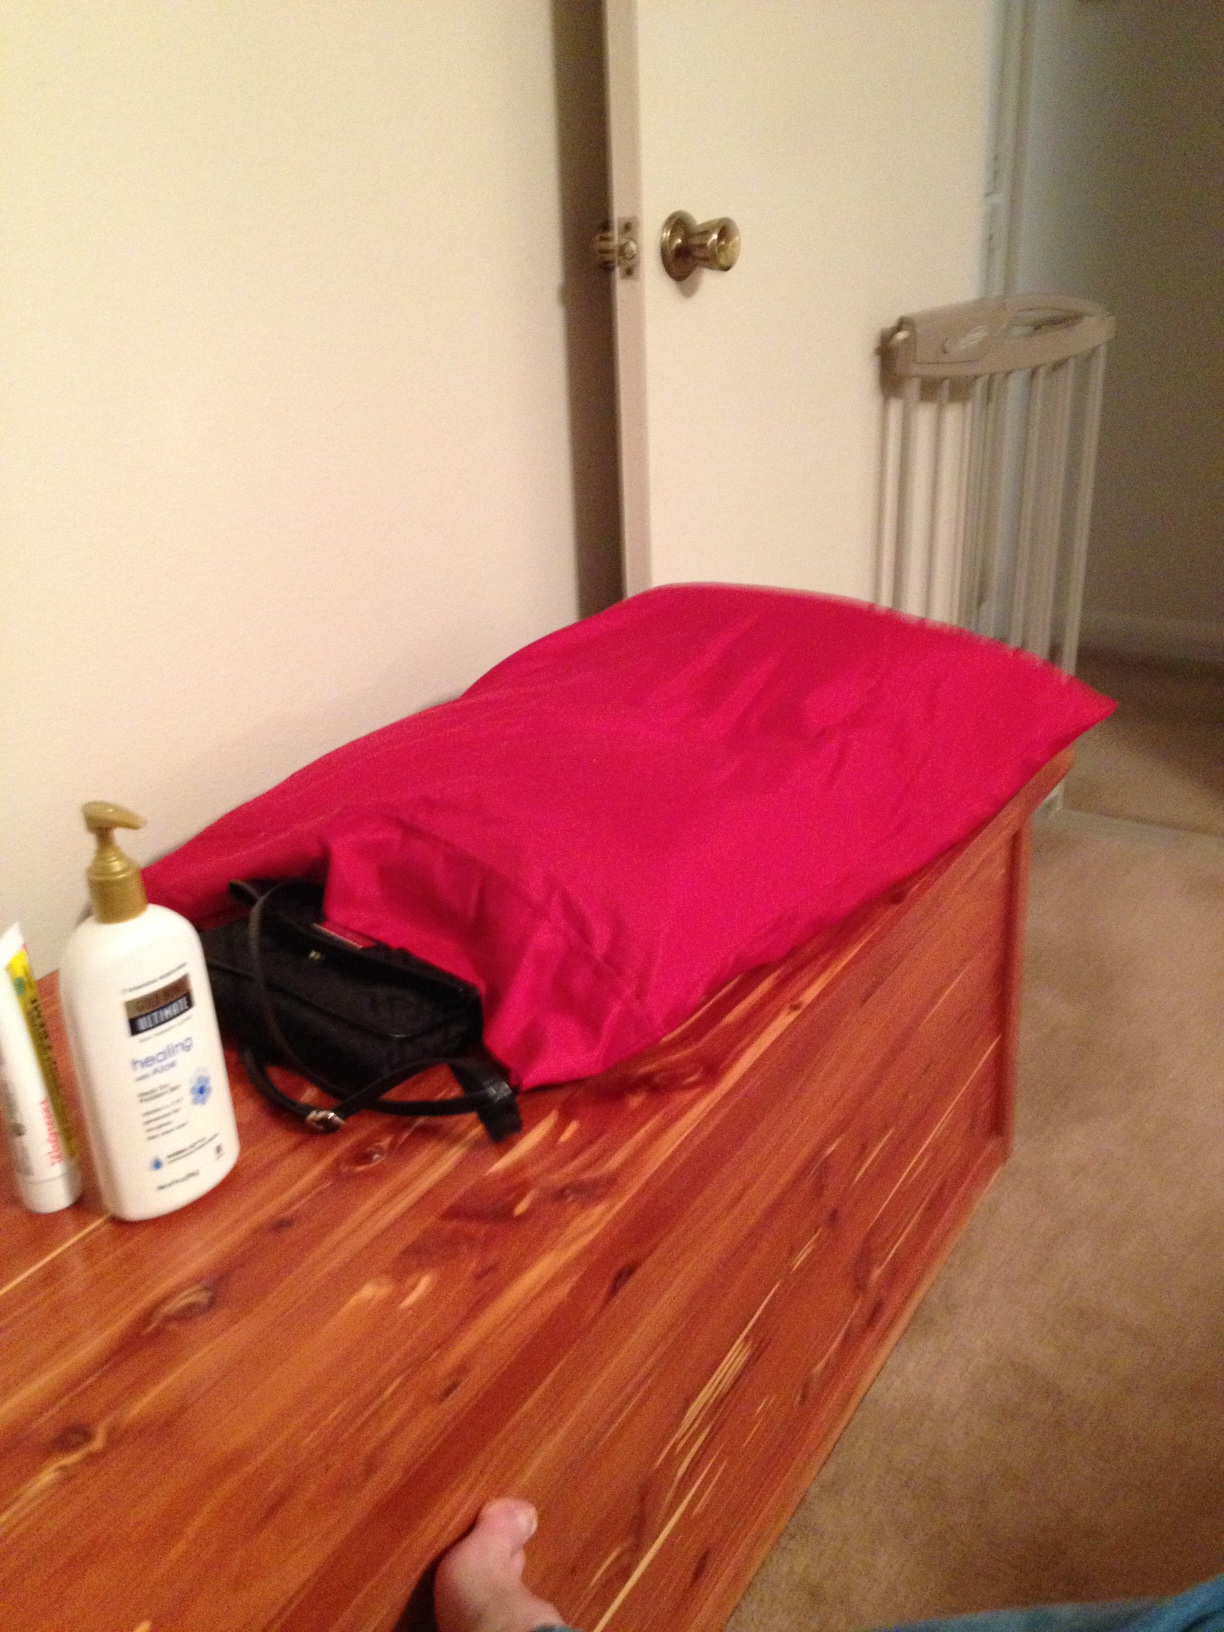 A photo captured by a person who is blind. A computer-generated caption for this photo is: A bedroom with a red bed and a bag.